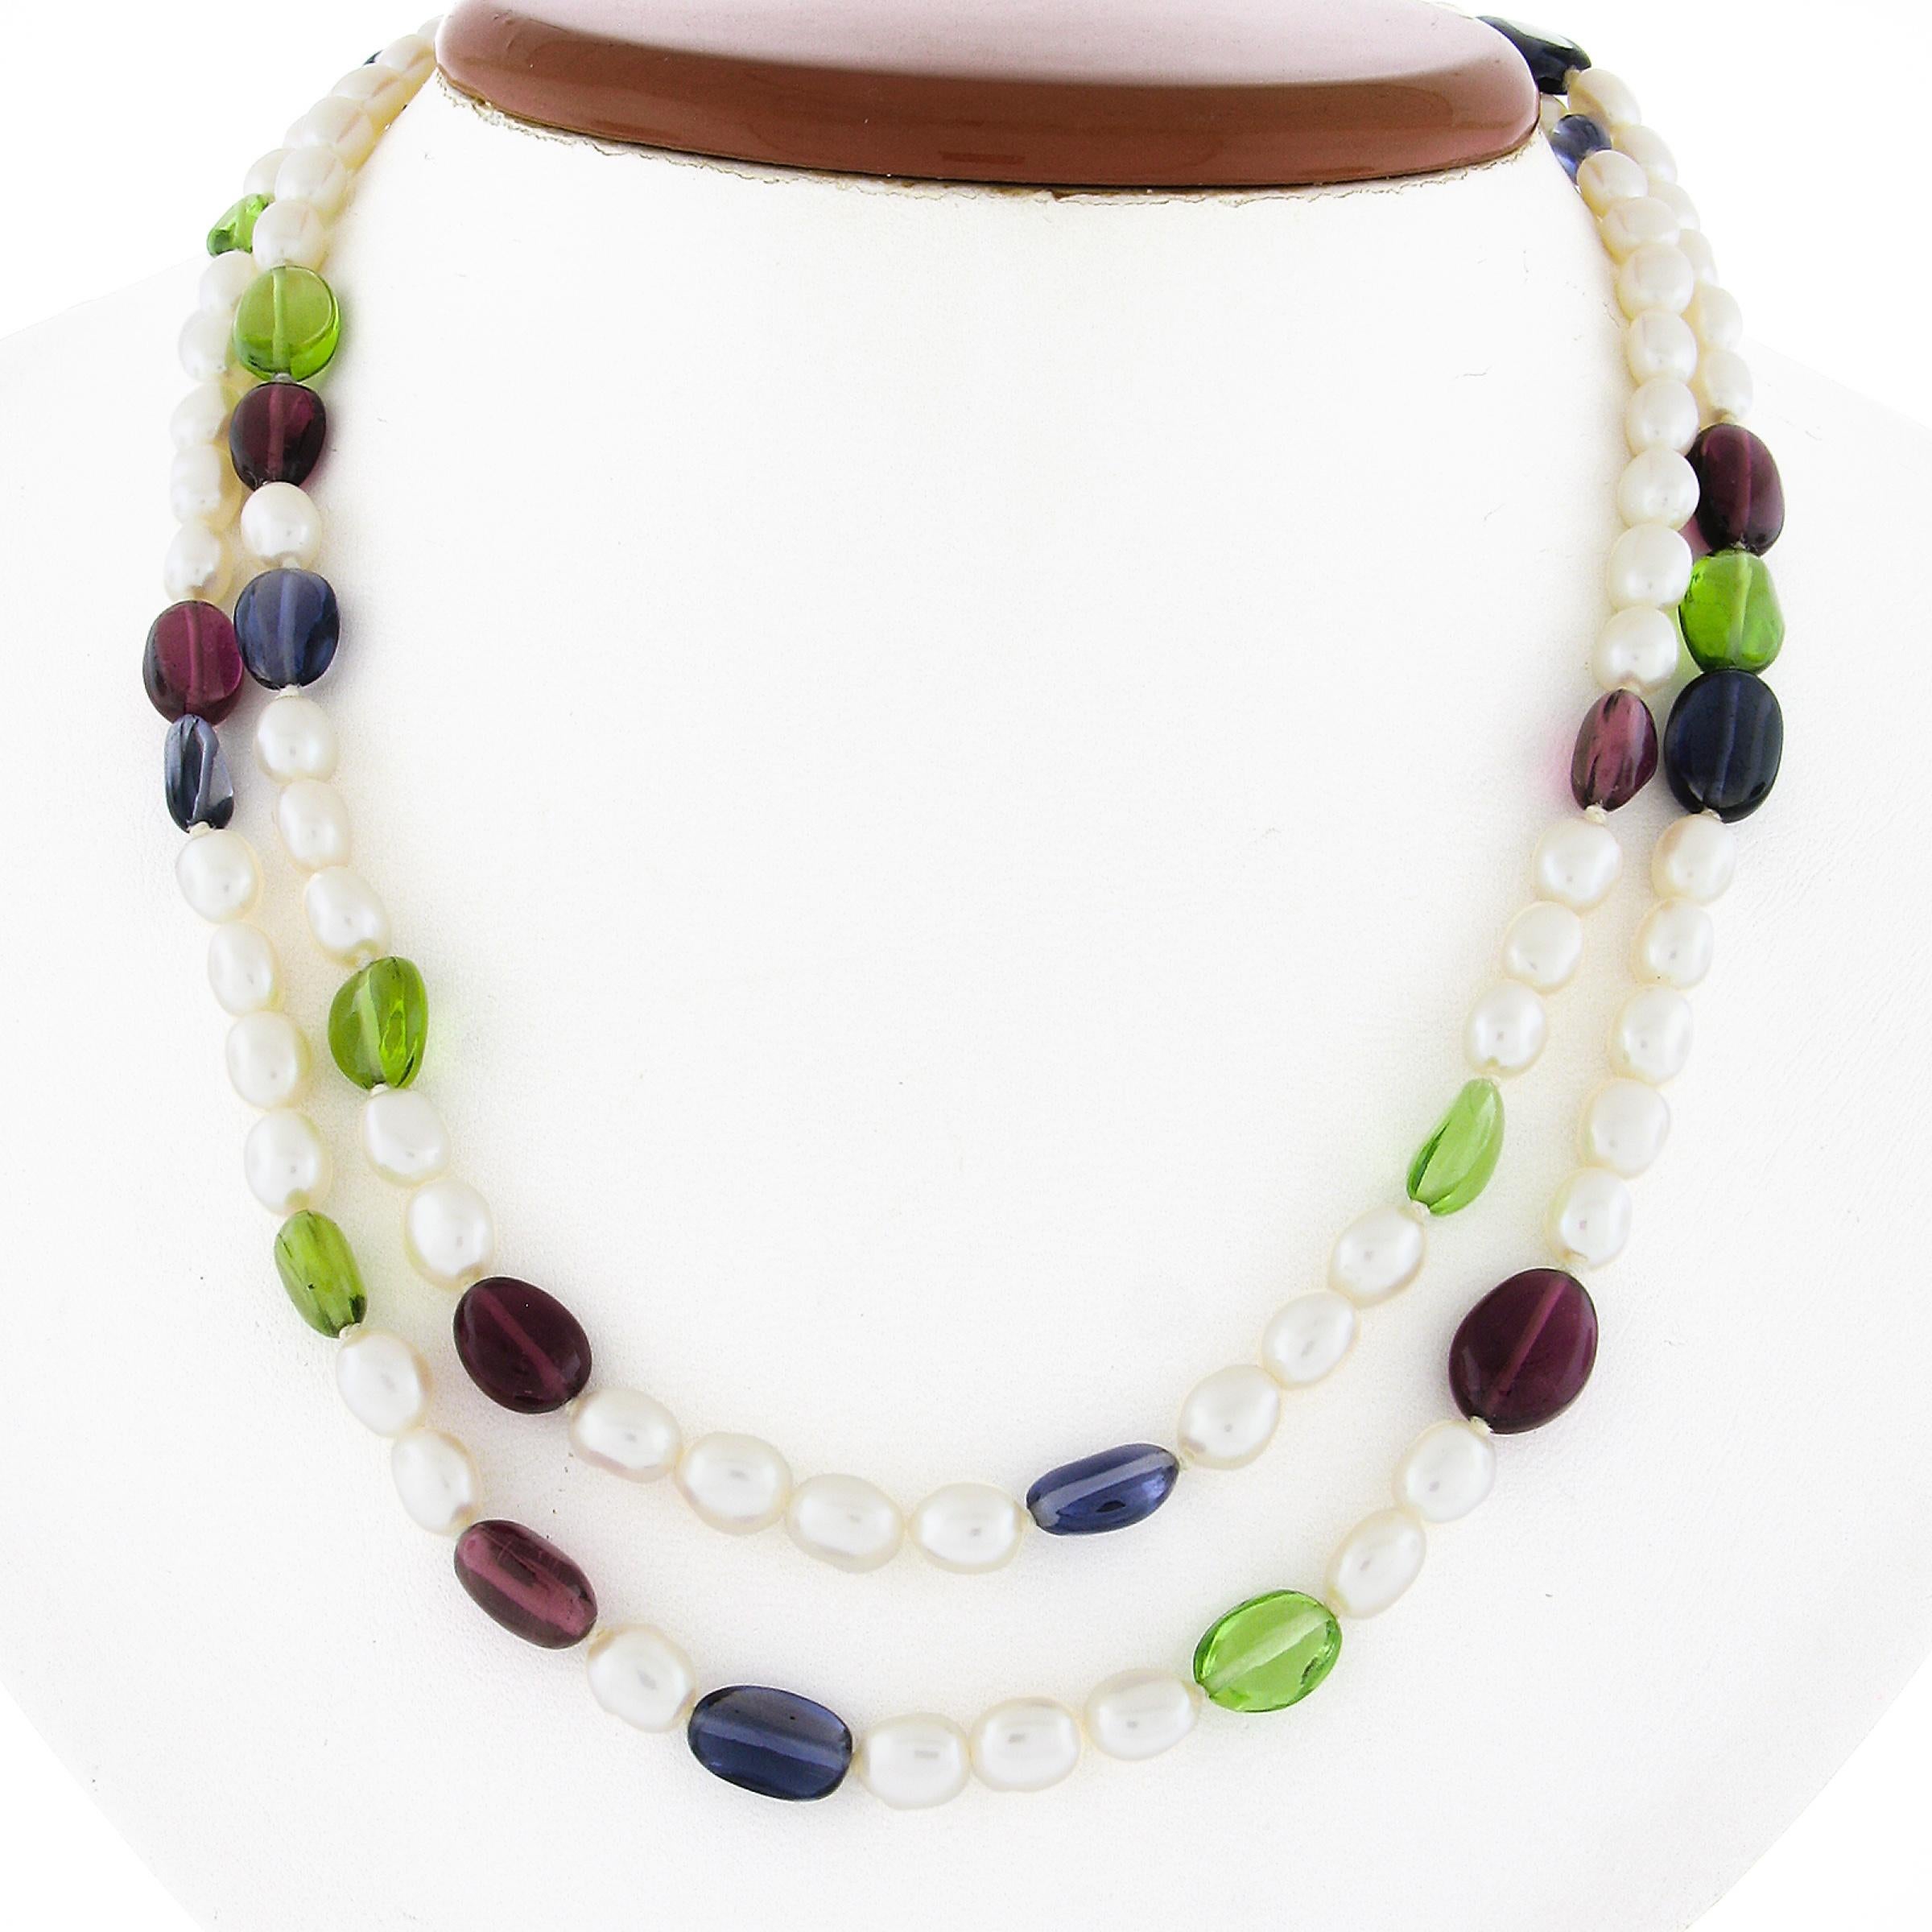 --Stone(s):--
110 Natural Genuine Peridots, Iolites, Pink Tourmalines & Cultured Pearls - Tumbled Shape - Strung - Green, Purple, Pink & White Color 

Material: String & Solid 18k White Gold Clasp & Tag
Weight: 40.62 Grams
Chain Type: Bead